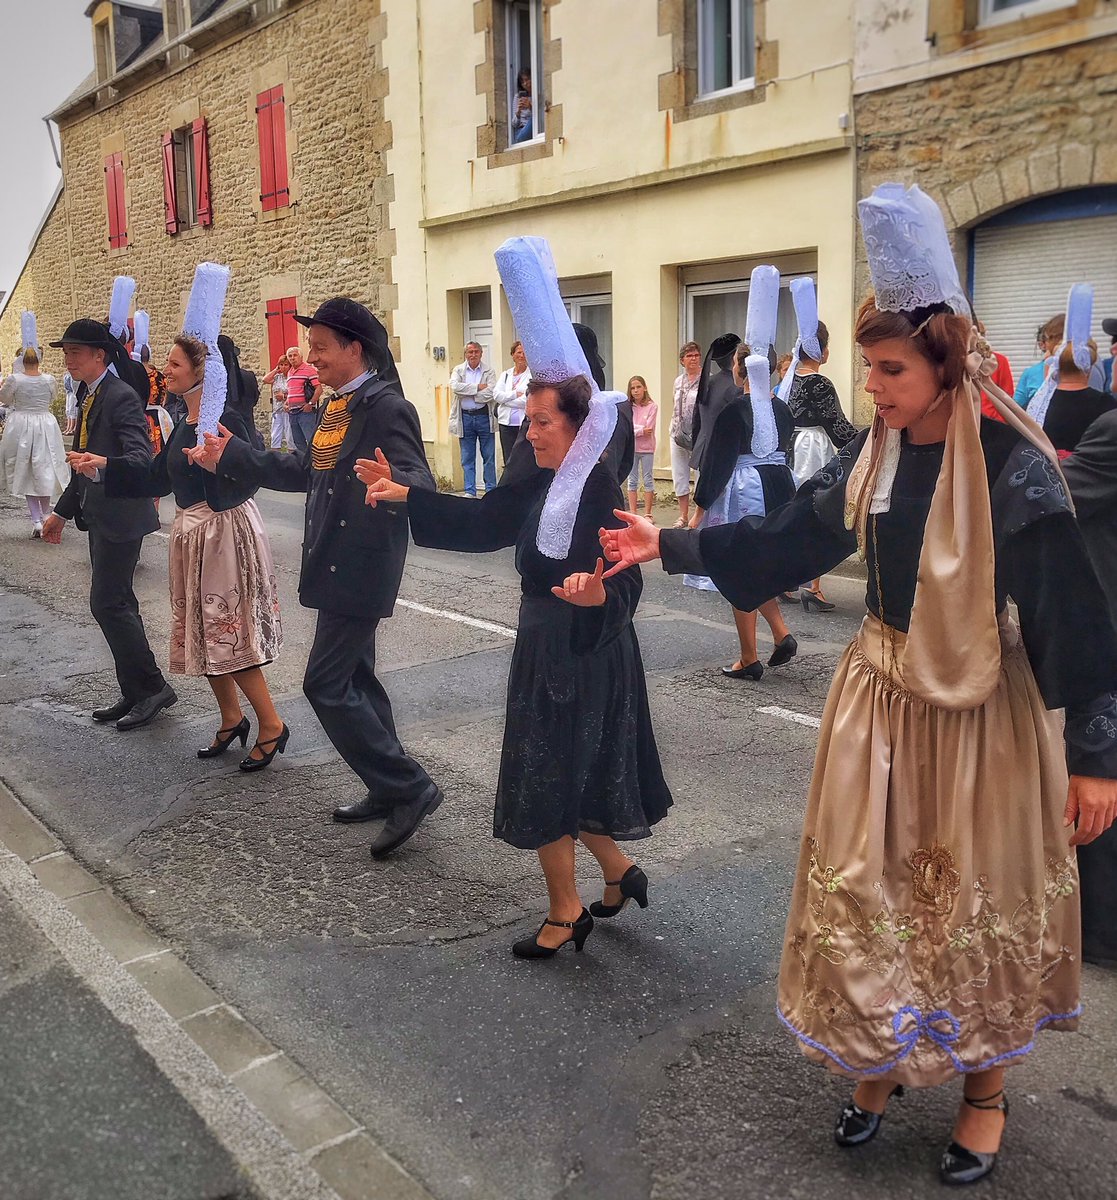 Kudos to the bigoudènes who made it through the whole parade in high heels 👠 👏 
#ThePhotoHour #photography #streetphotography #parade #traditionalclothes #traditionaloutfit #Bretagne #Brittany #breizh #snapseed #iphonephotography